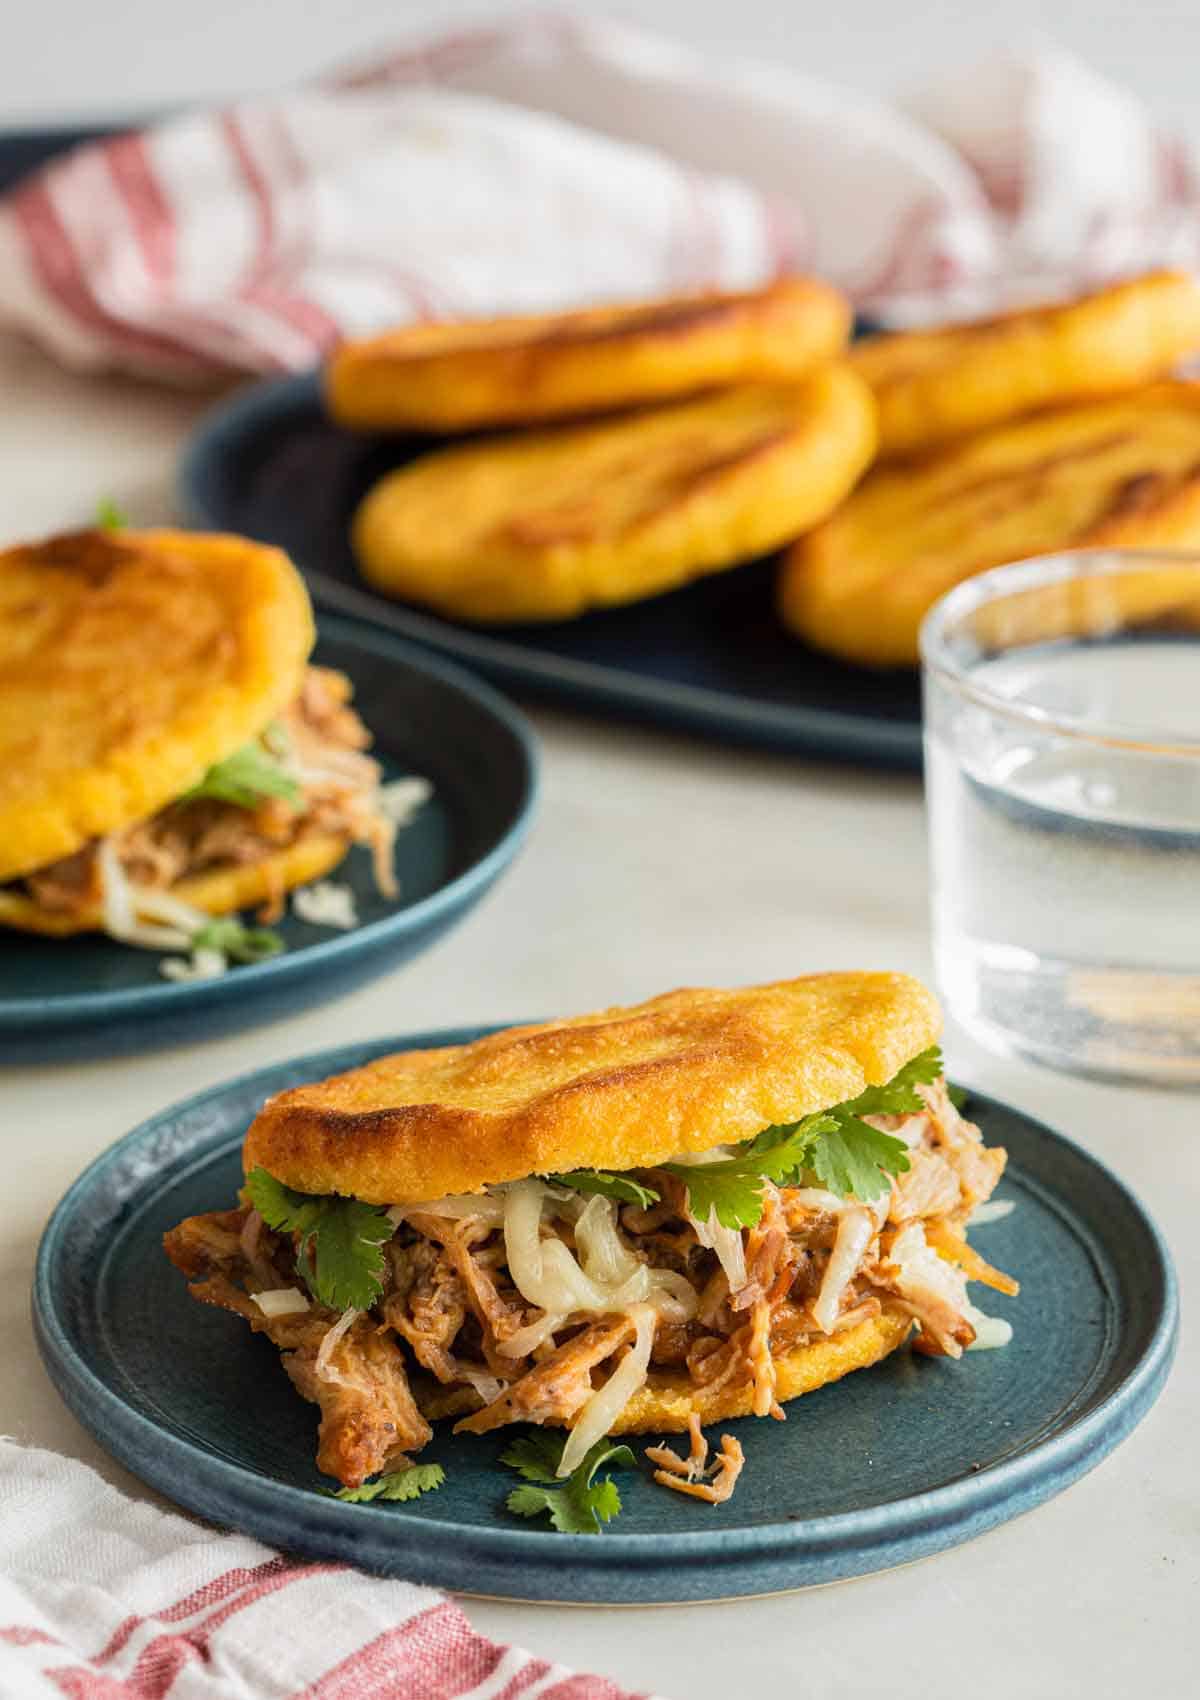 A plate with an arepa stuffed with shredded meat.